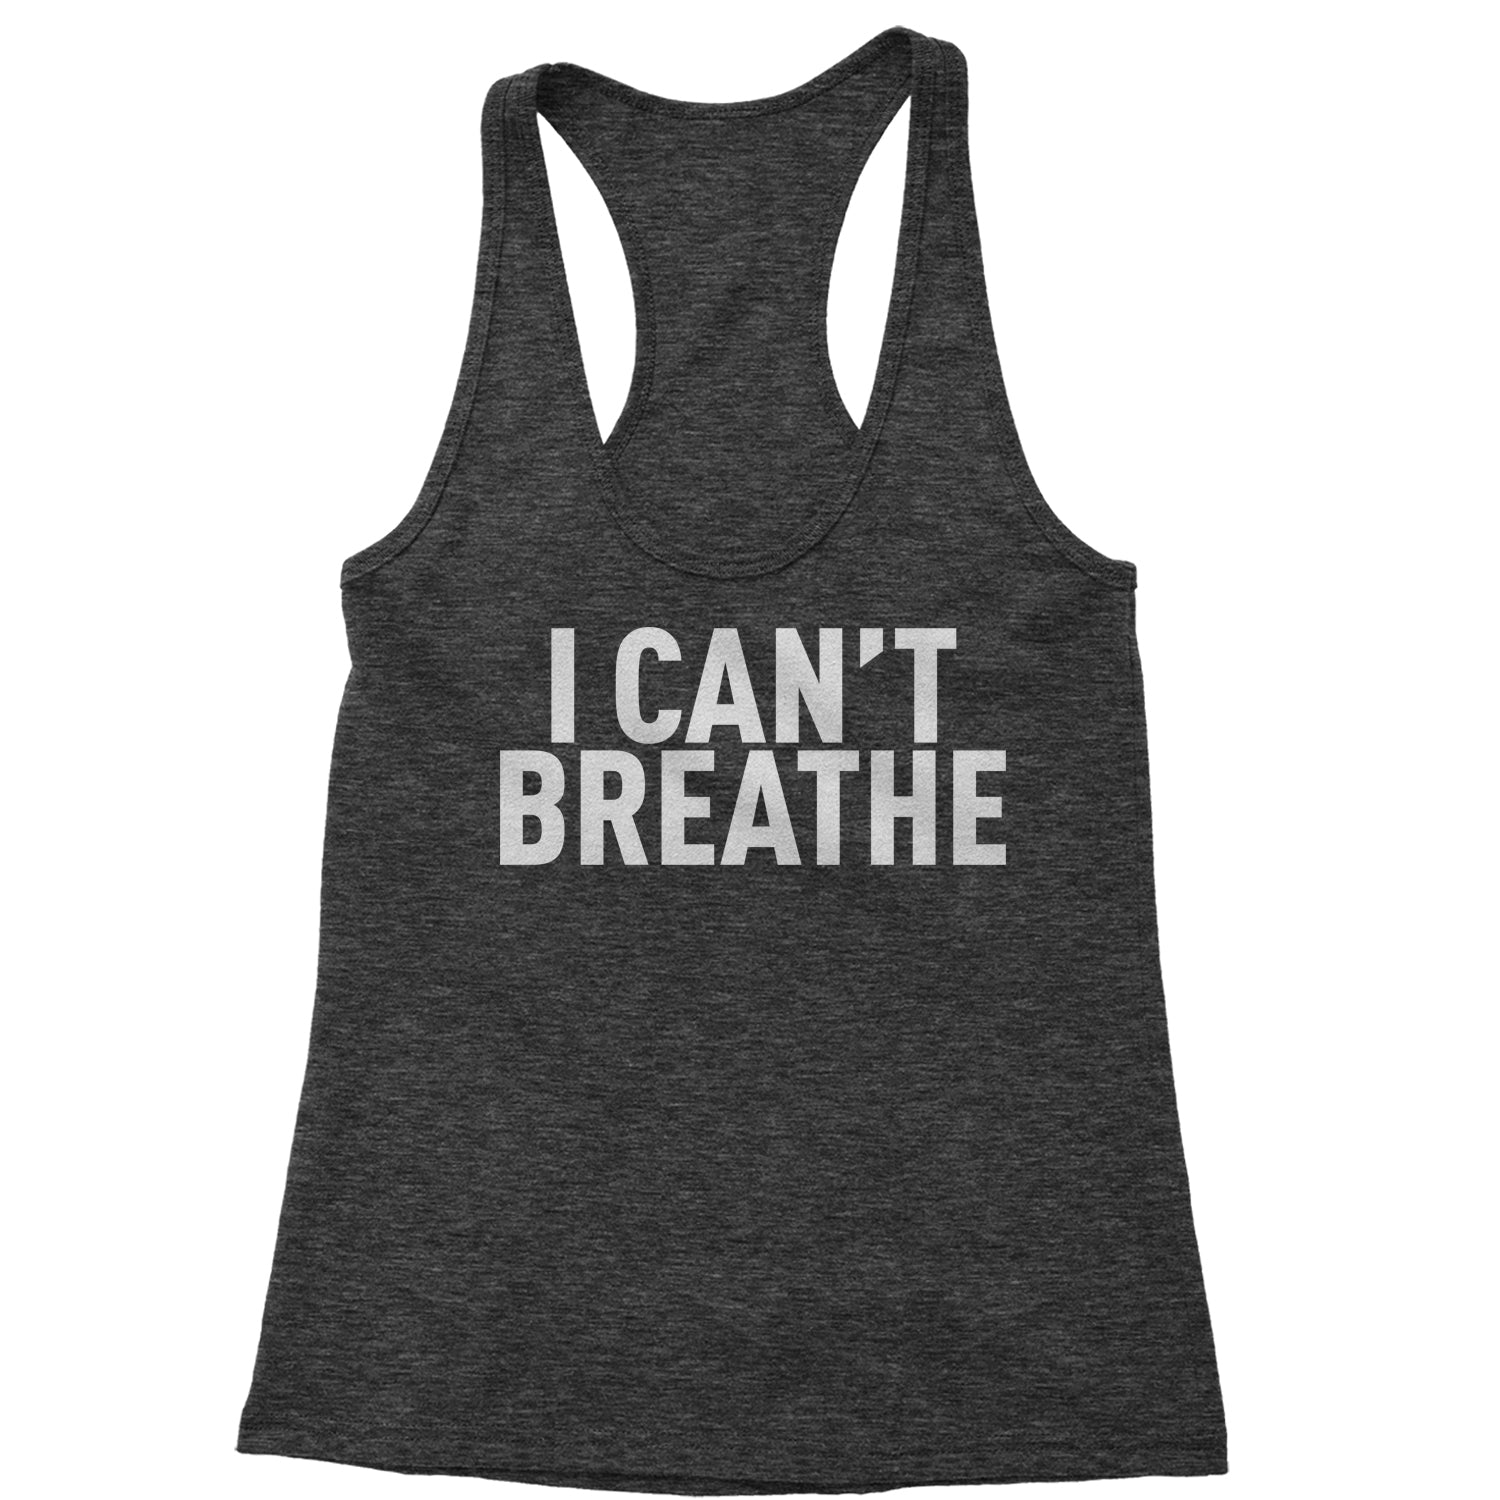 I Can't Breathe Social Justice Racerback Tank Top for Women african, africanamerican, american, black, blm, breonna, floyd, george, life, lives, matter, taylor by Expression Tees